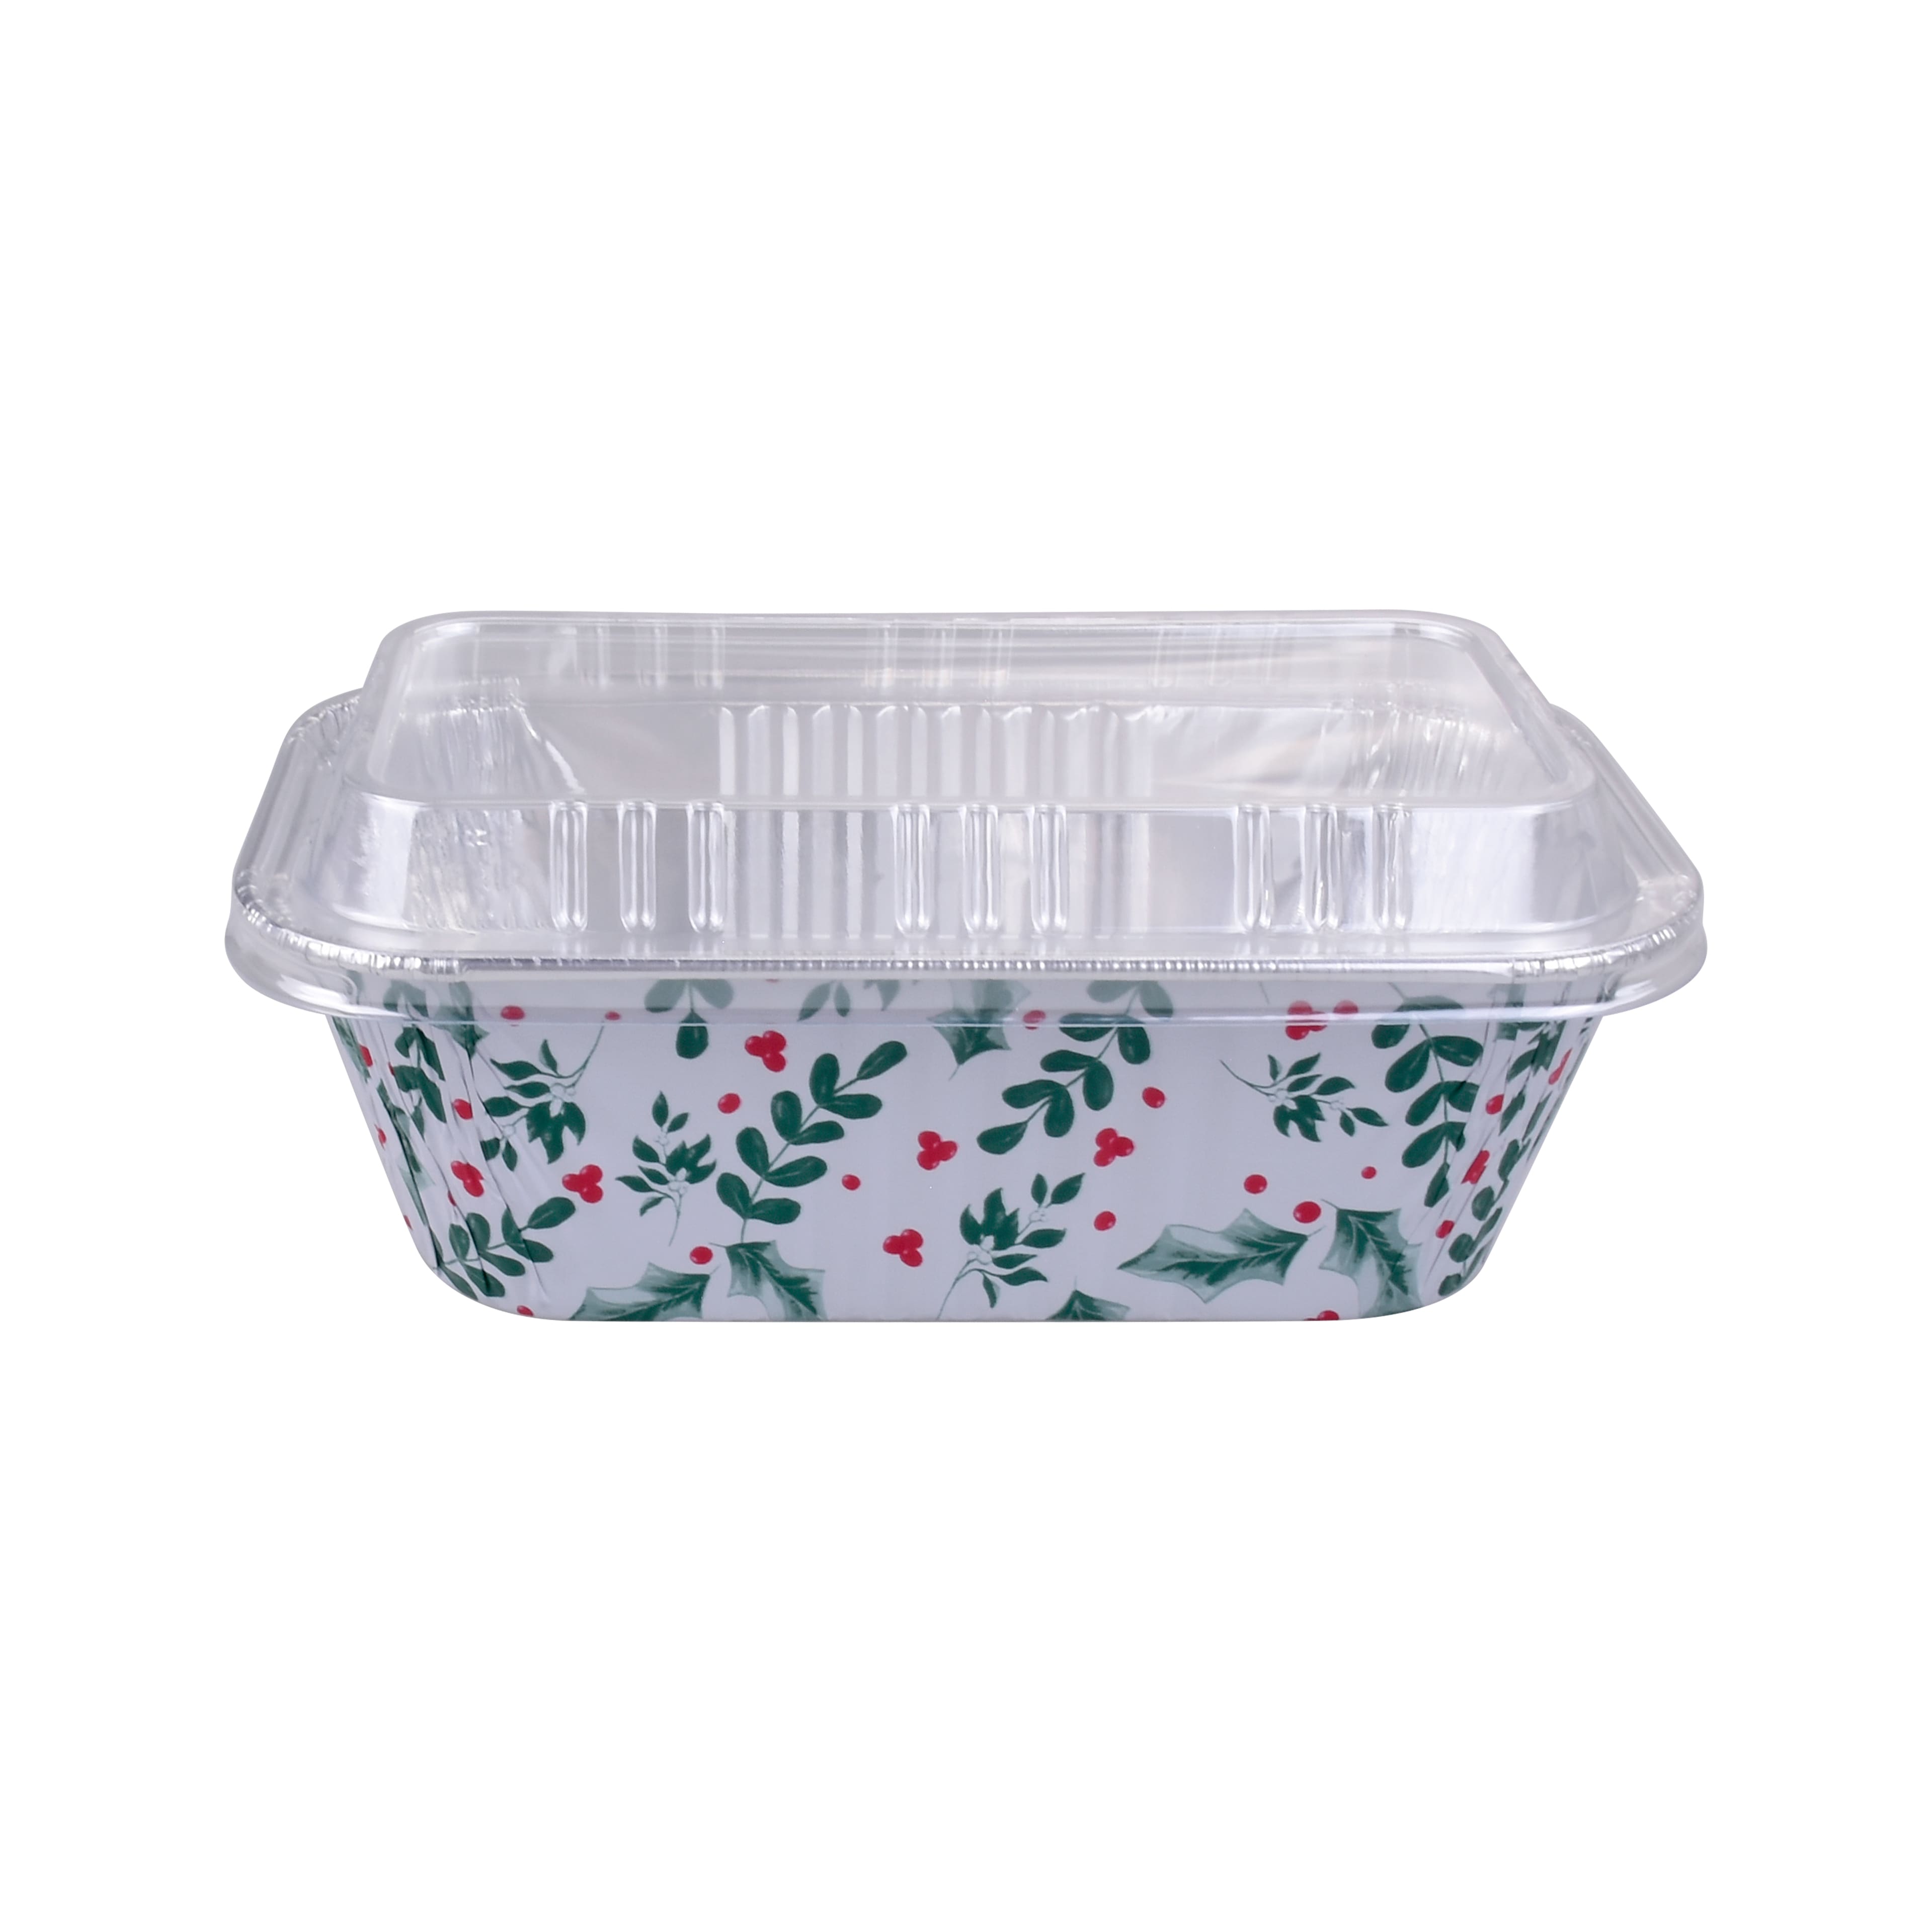 6 Christmas Holiday Stripes Disposable Aluminum Baking Pans by Celebrate  It™, 6ct.